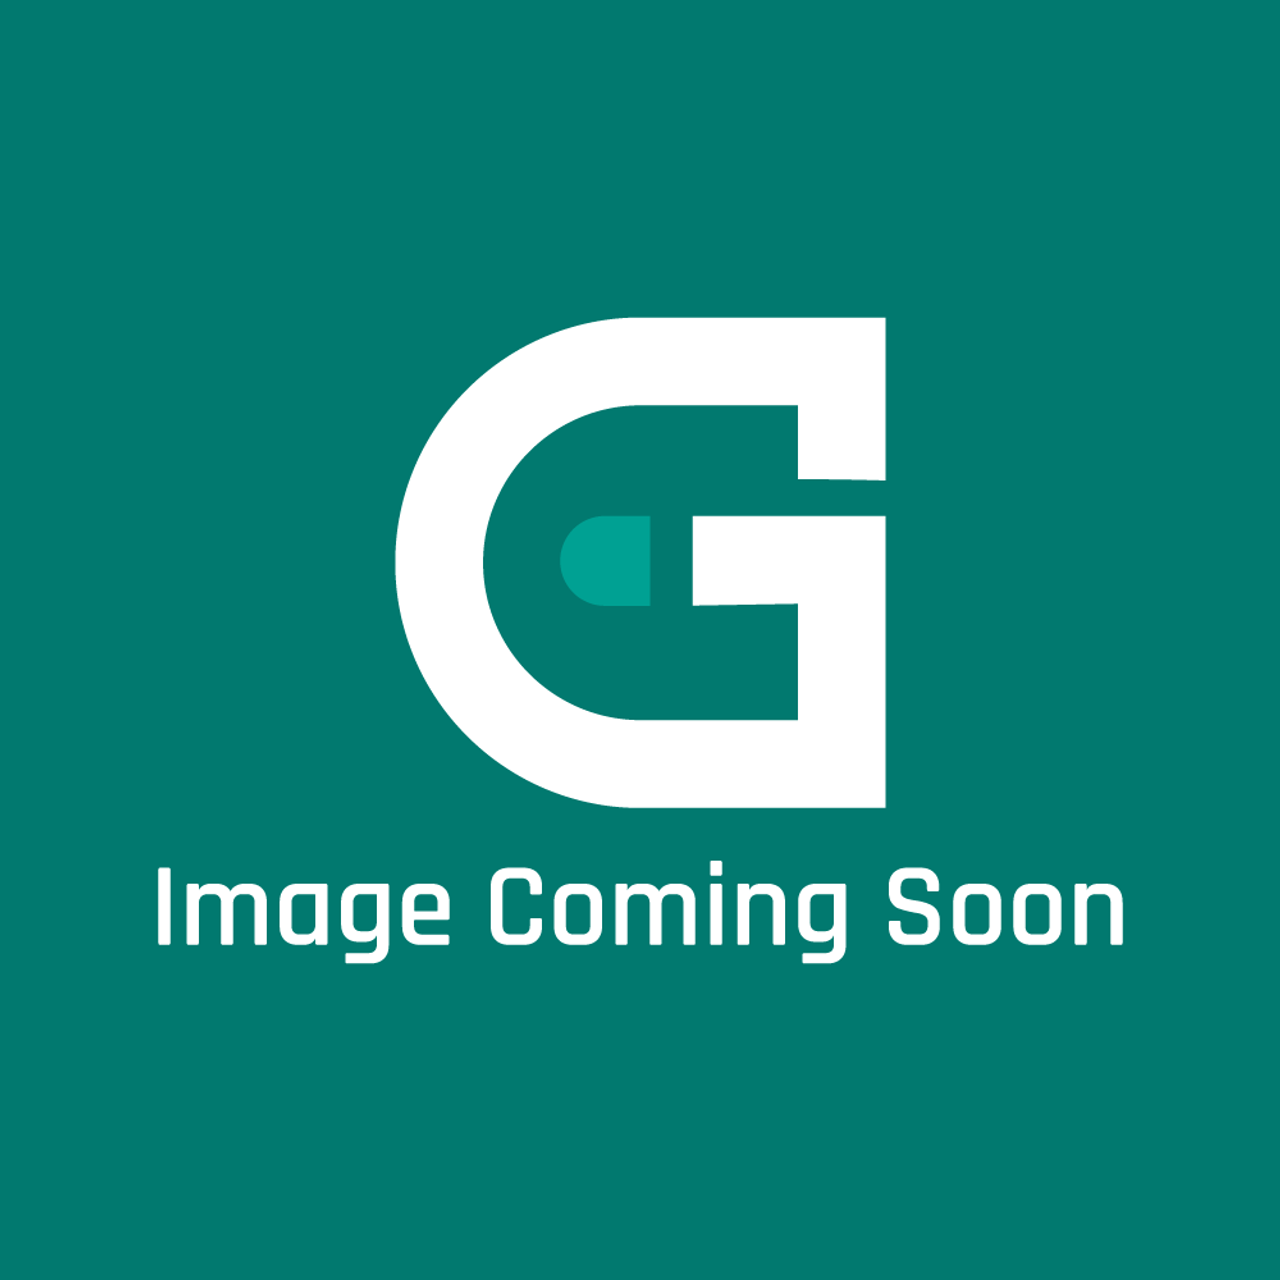 GE Appliances WJ57X10060 - Suction Tube - Image Coming Soon!